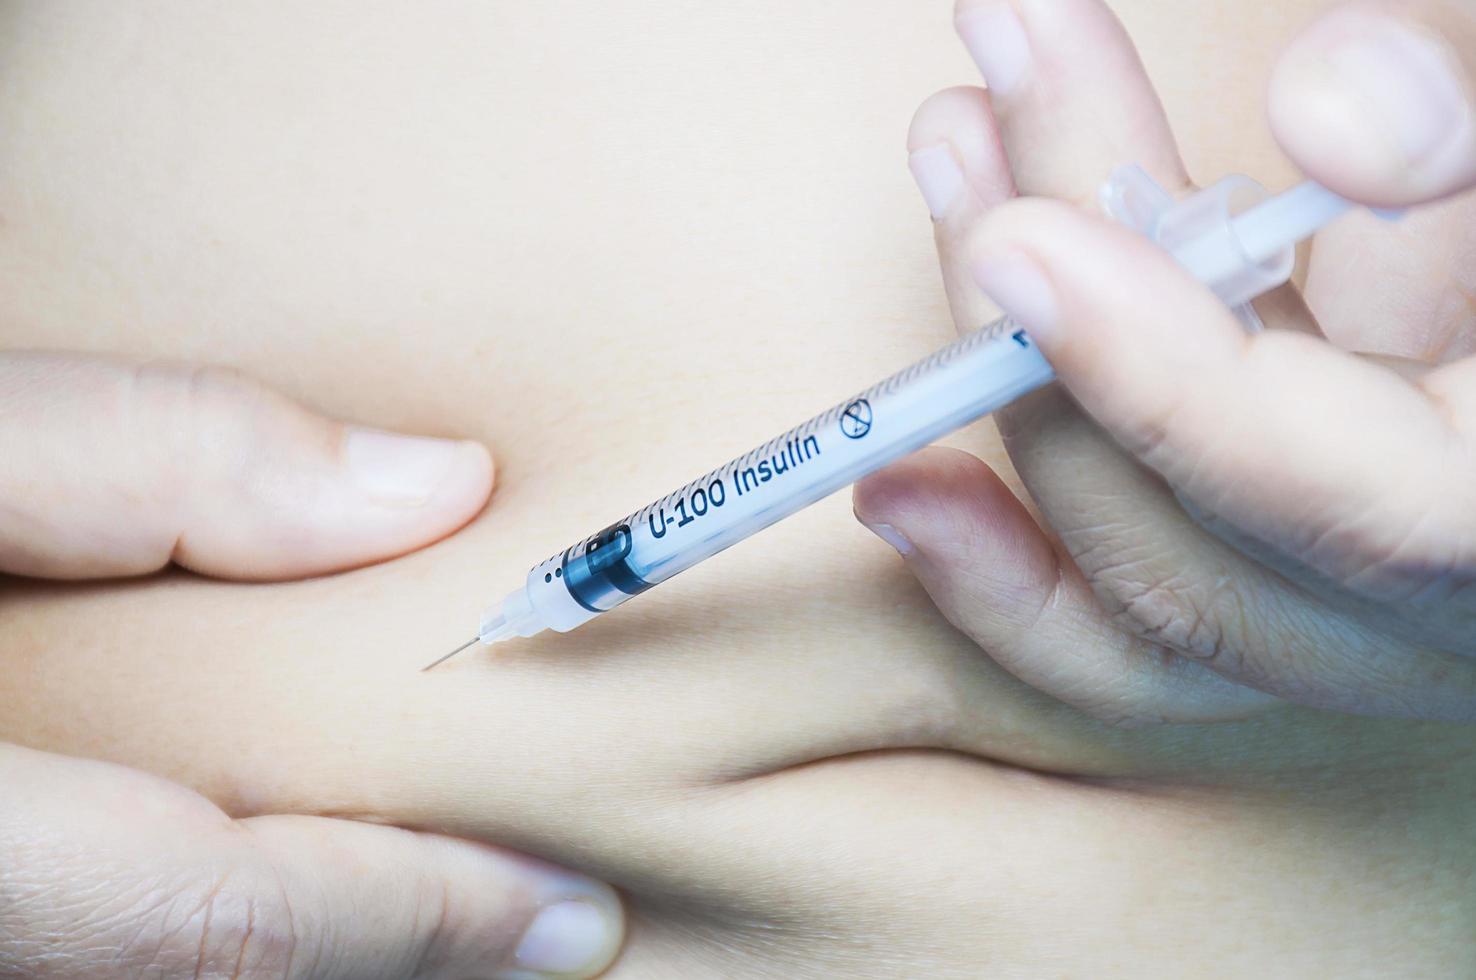 A lady is injecting insulin into her stomach. photo